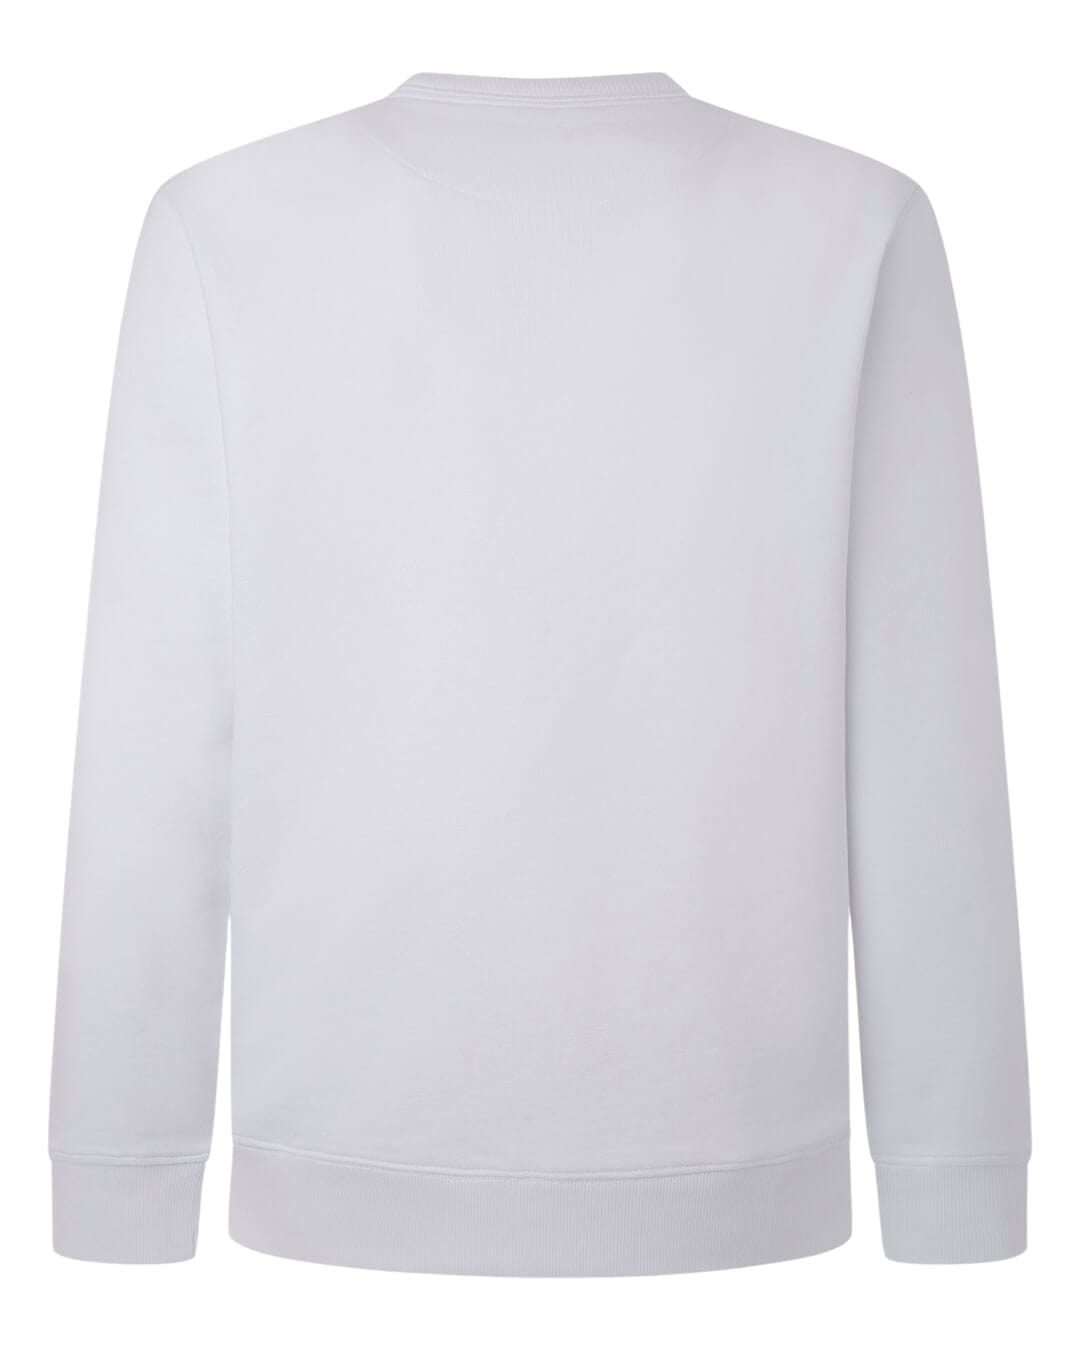 Pepe Jeans Jumpers Pepe Jeans White Crewneck Sweatshirt With Logo